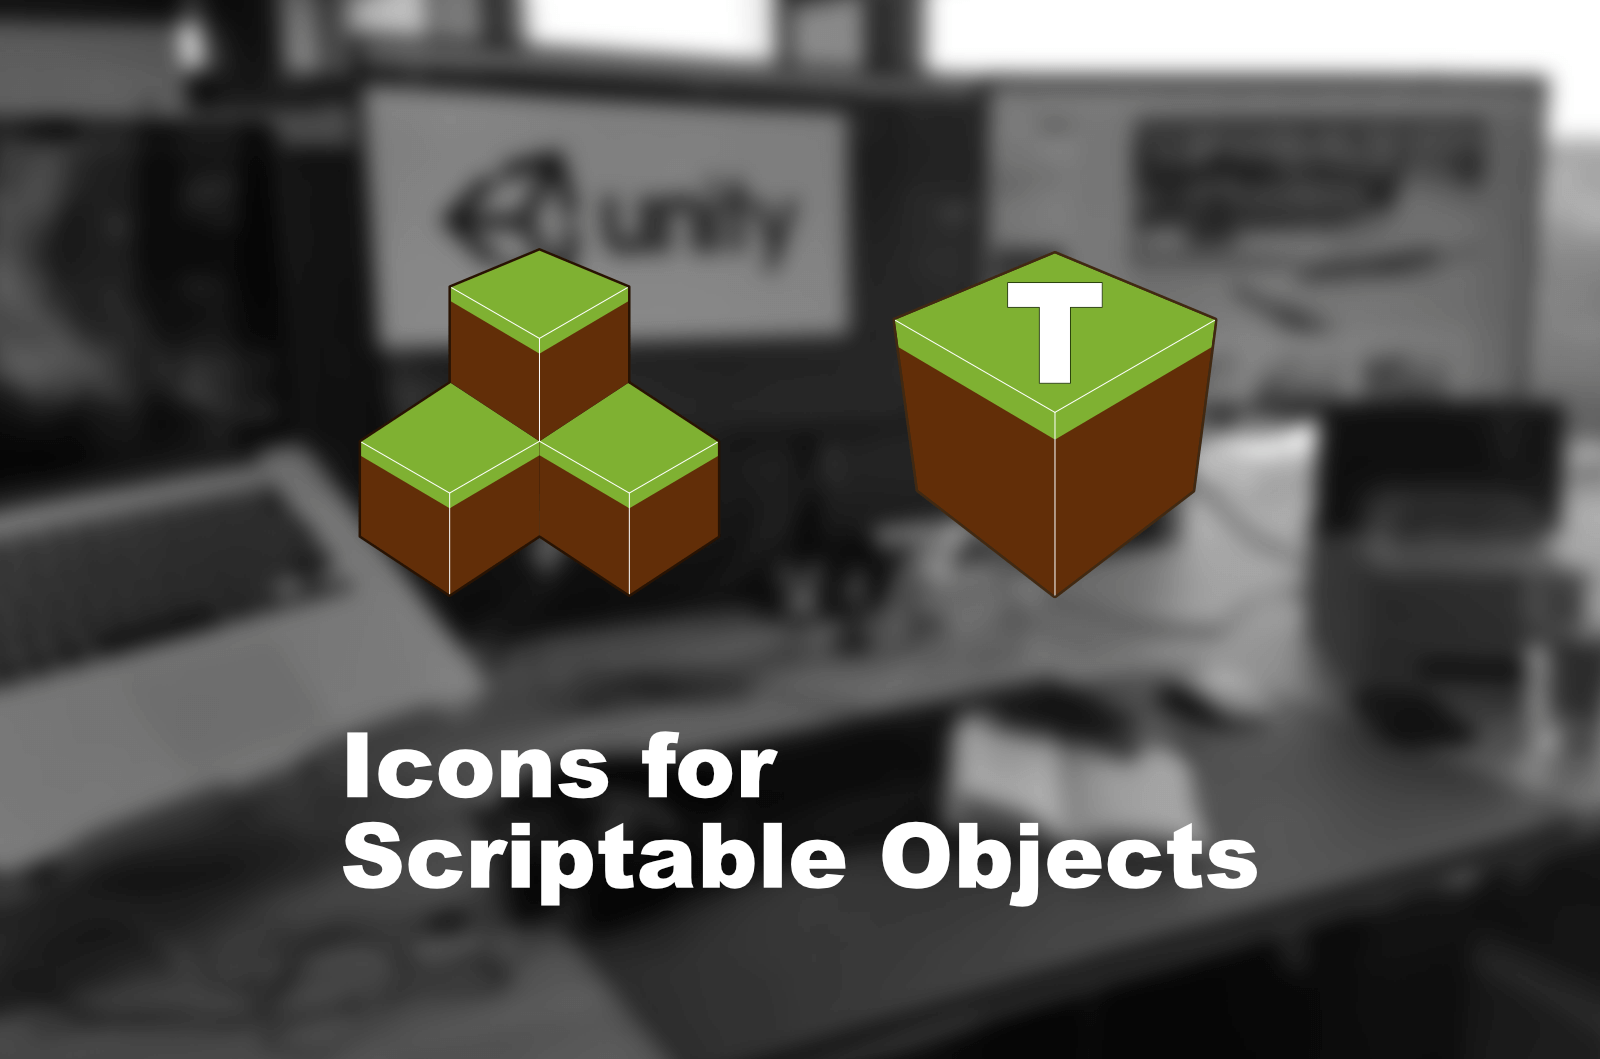 Scriptable objects